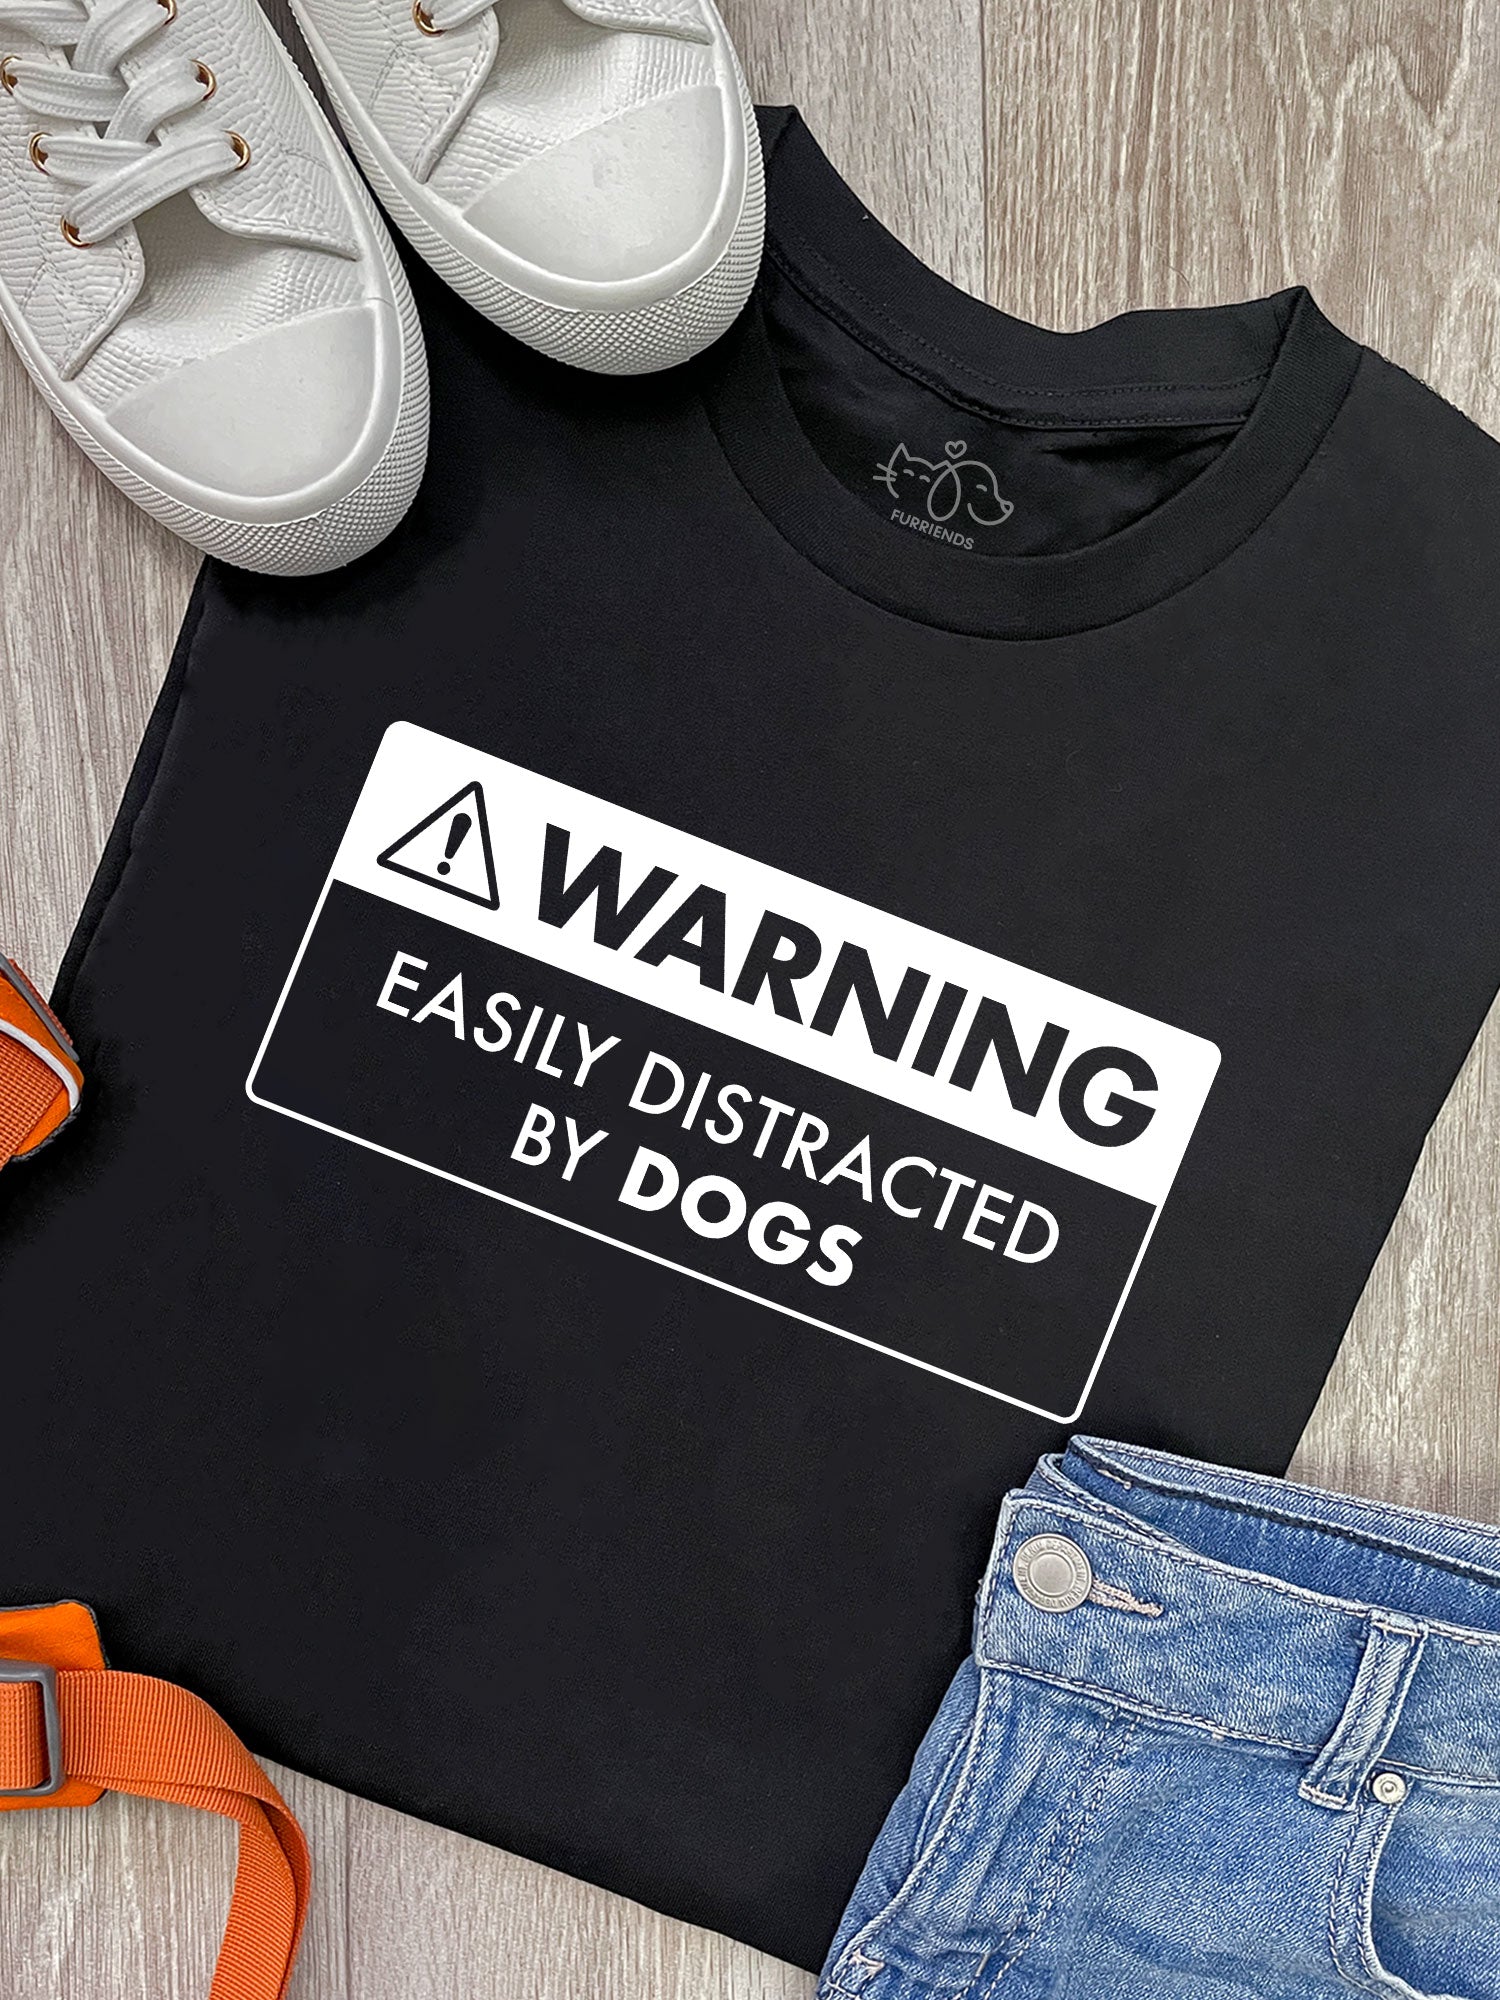 Warning! Easily Distracted By Dogs Sign